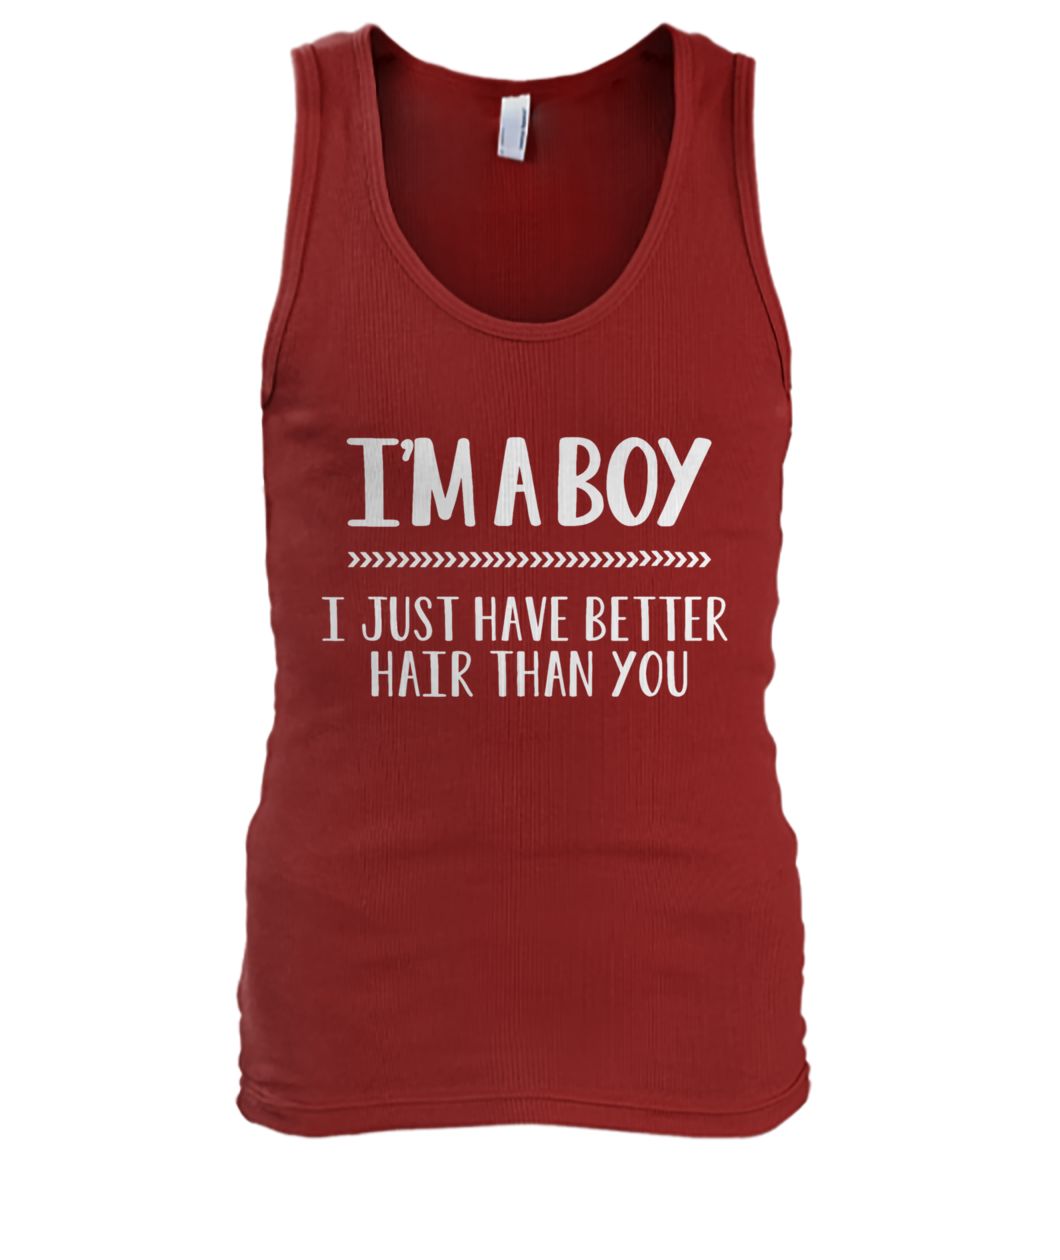 I'm a boy I just have better hair than you men's tank top